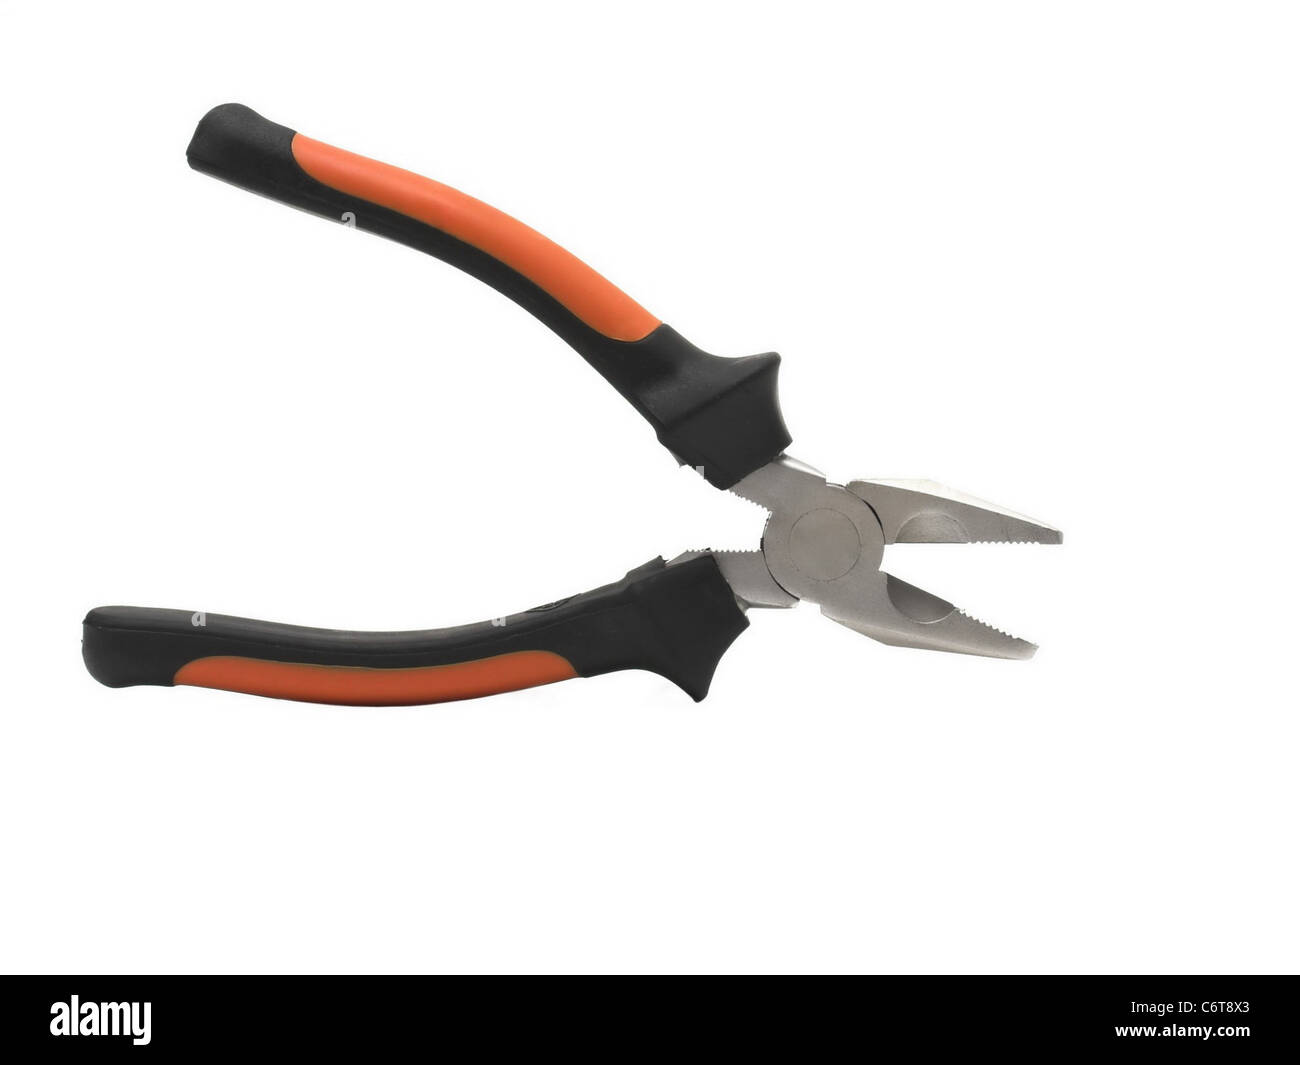 Flat-nose Combination pliers on a white background. Isolated image. Stock Photo